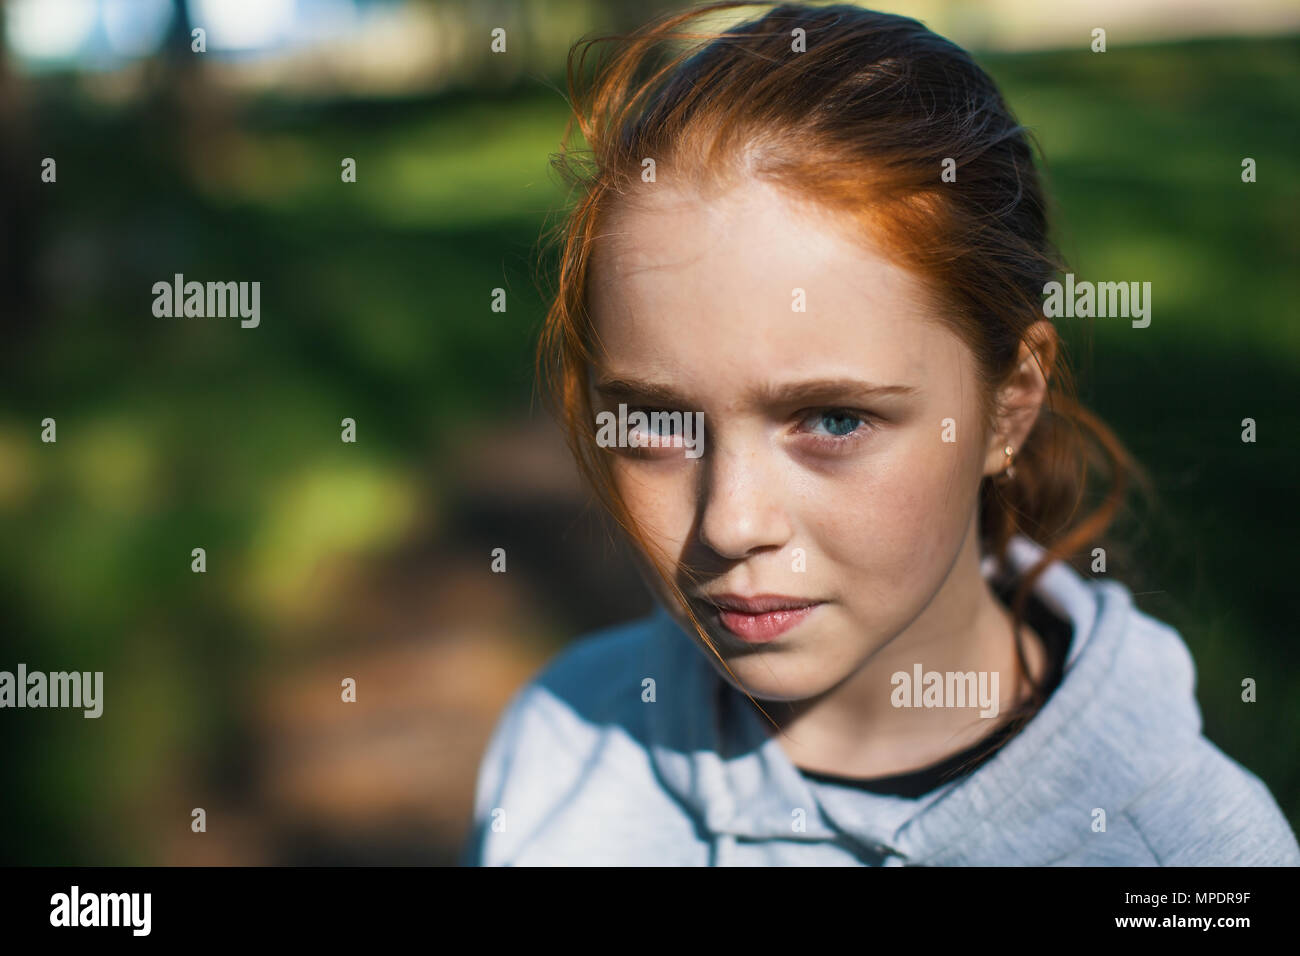 Close-up portrait of a red-haired teenage girl. Stock Photo